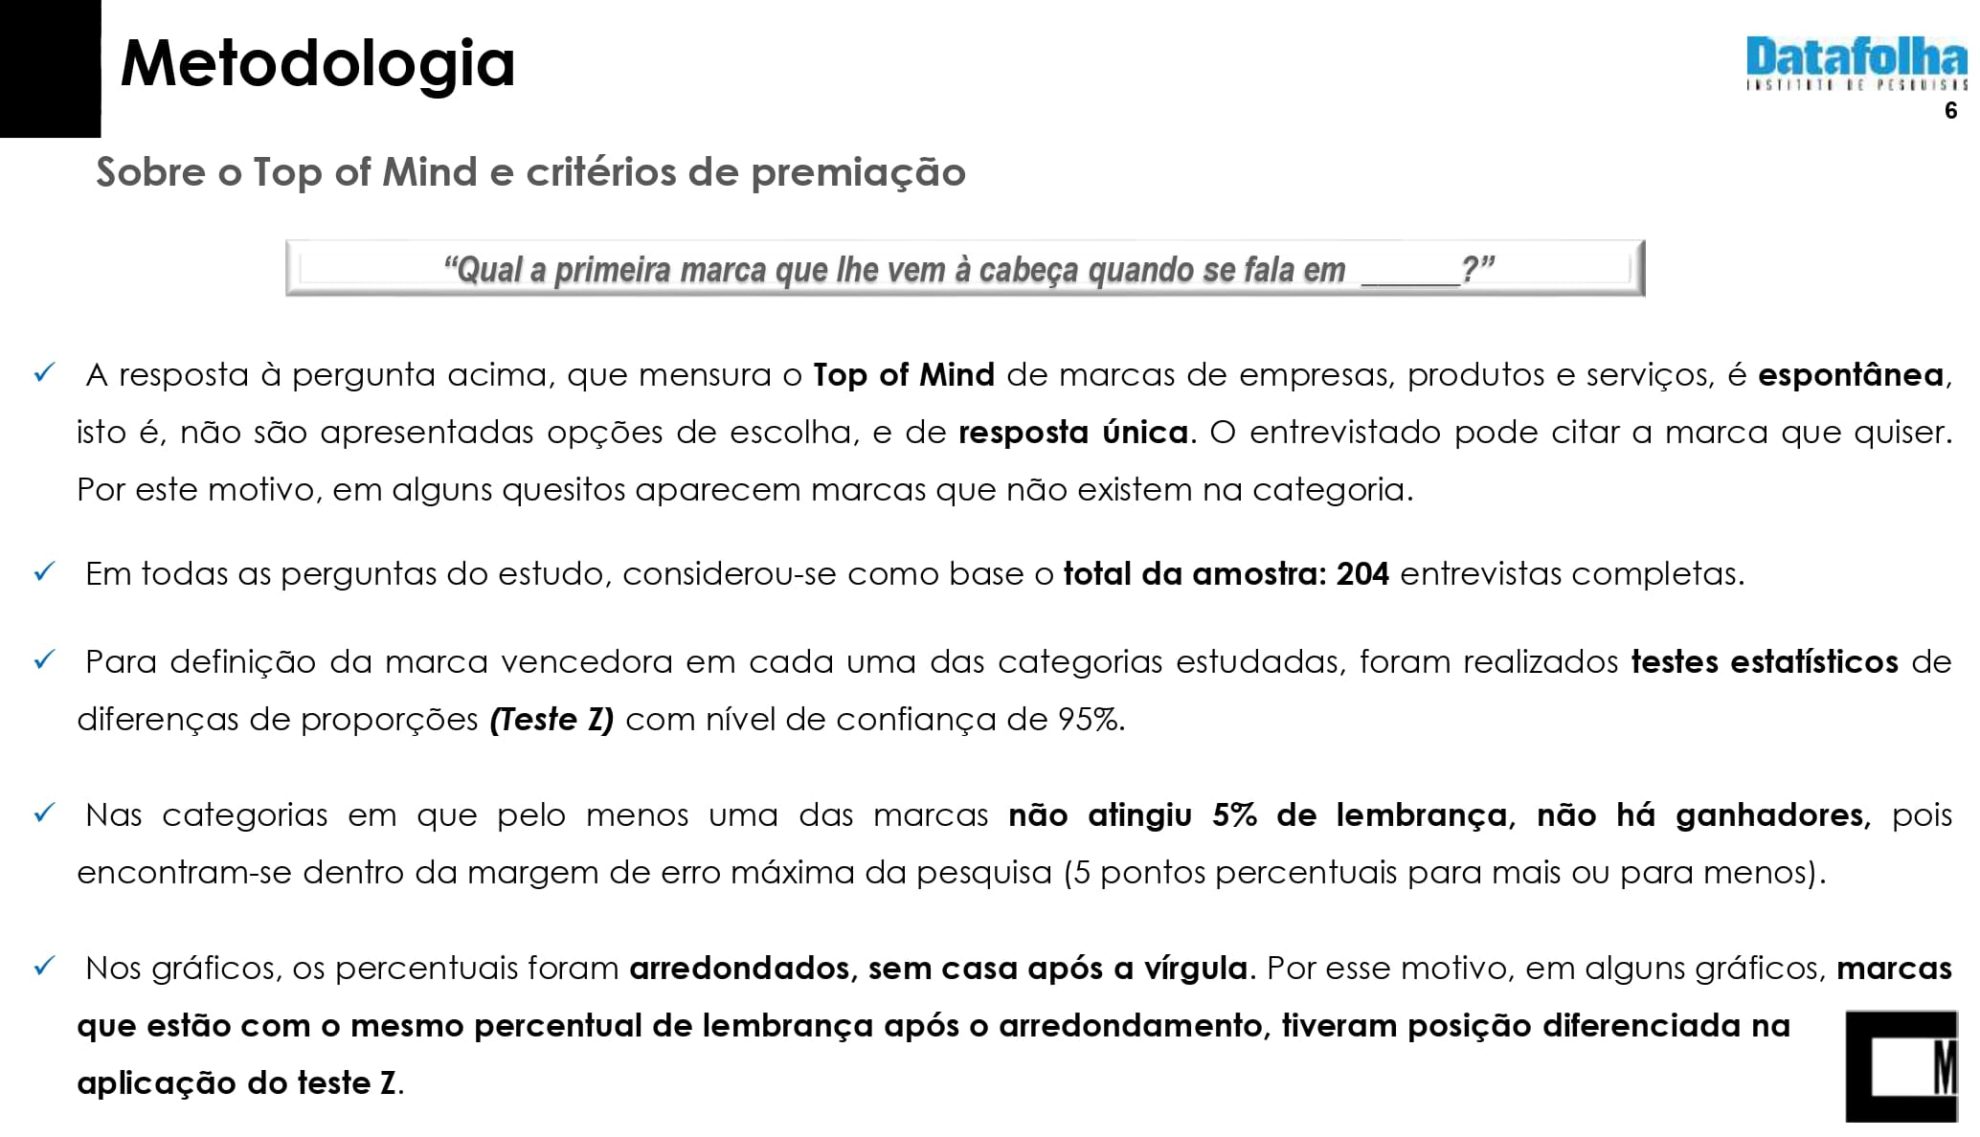 DATAFOLHA pages to jpg